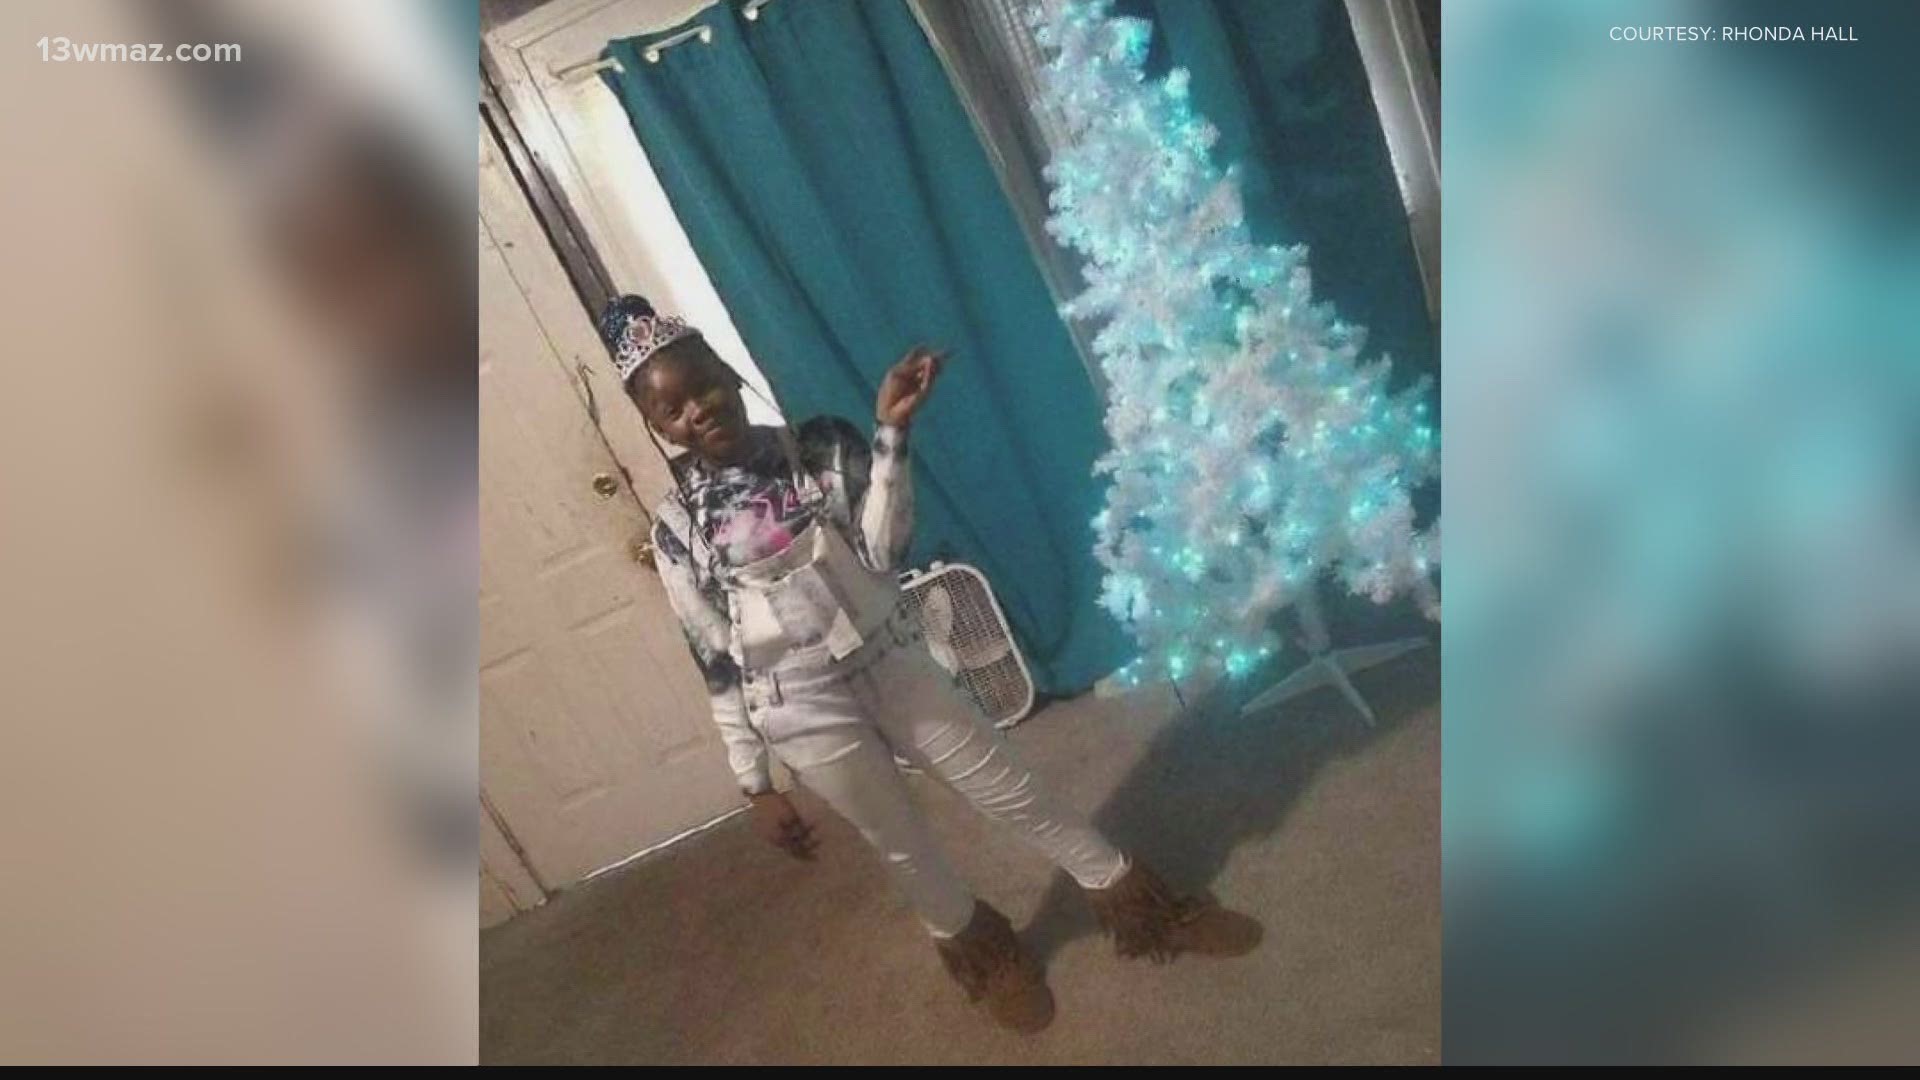 Li'Princess Hall is still in the hospital in Atlanta, her grandmother says it's time to get the kids who did this off the street.